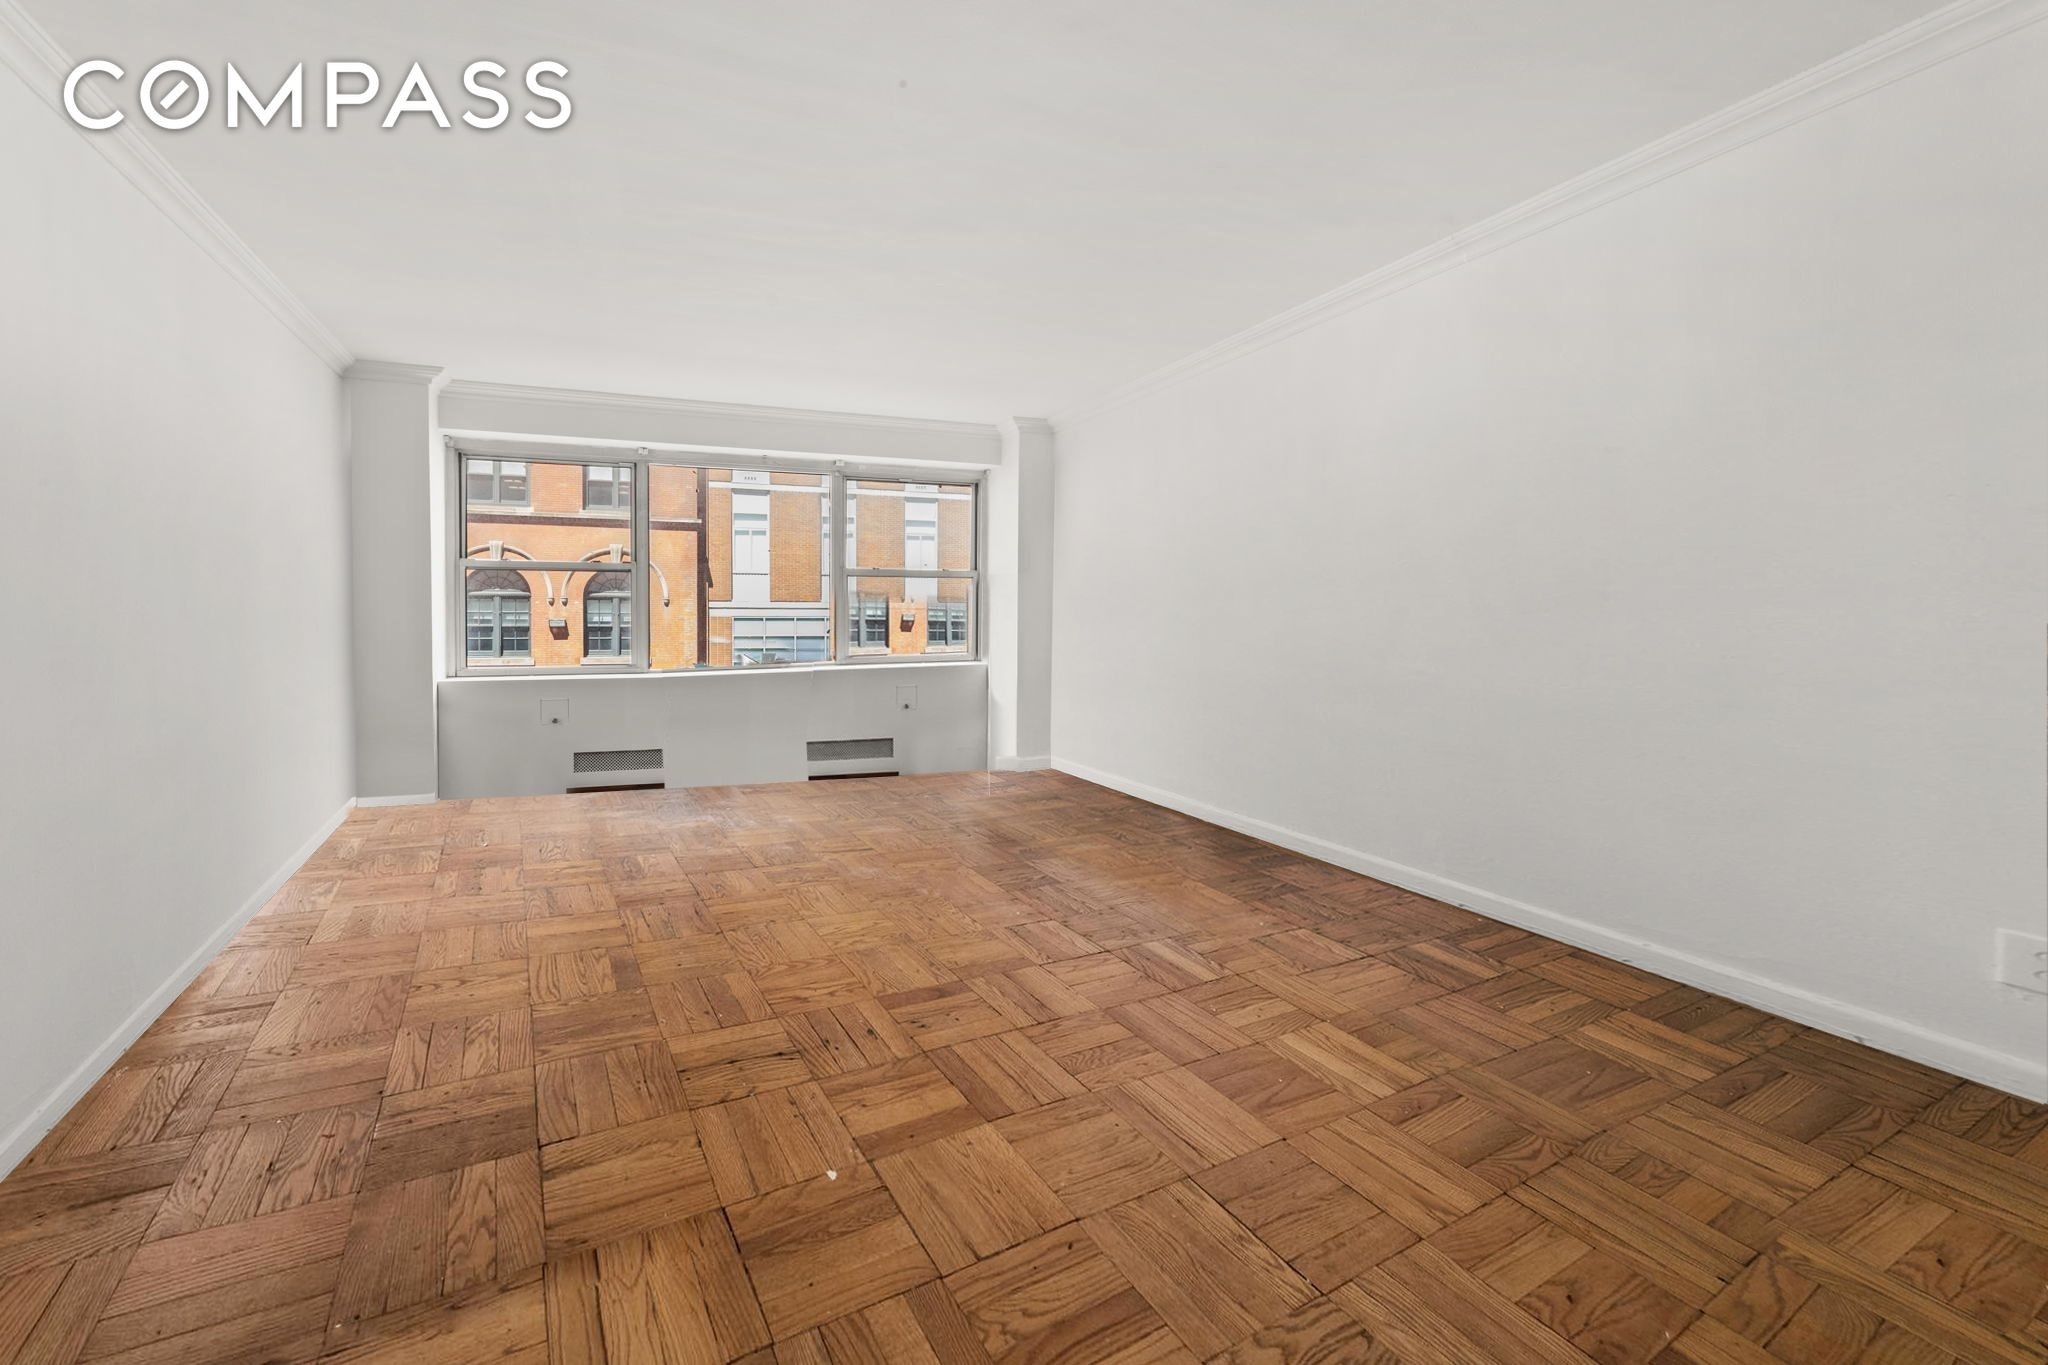 16. Co-op Properties for Sale at 150 E 77TH ST, 2A Lenox Hill, New York, New York 10075